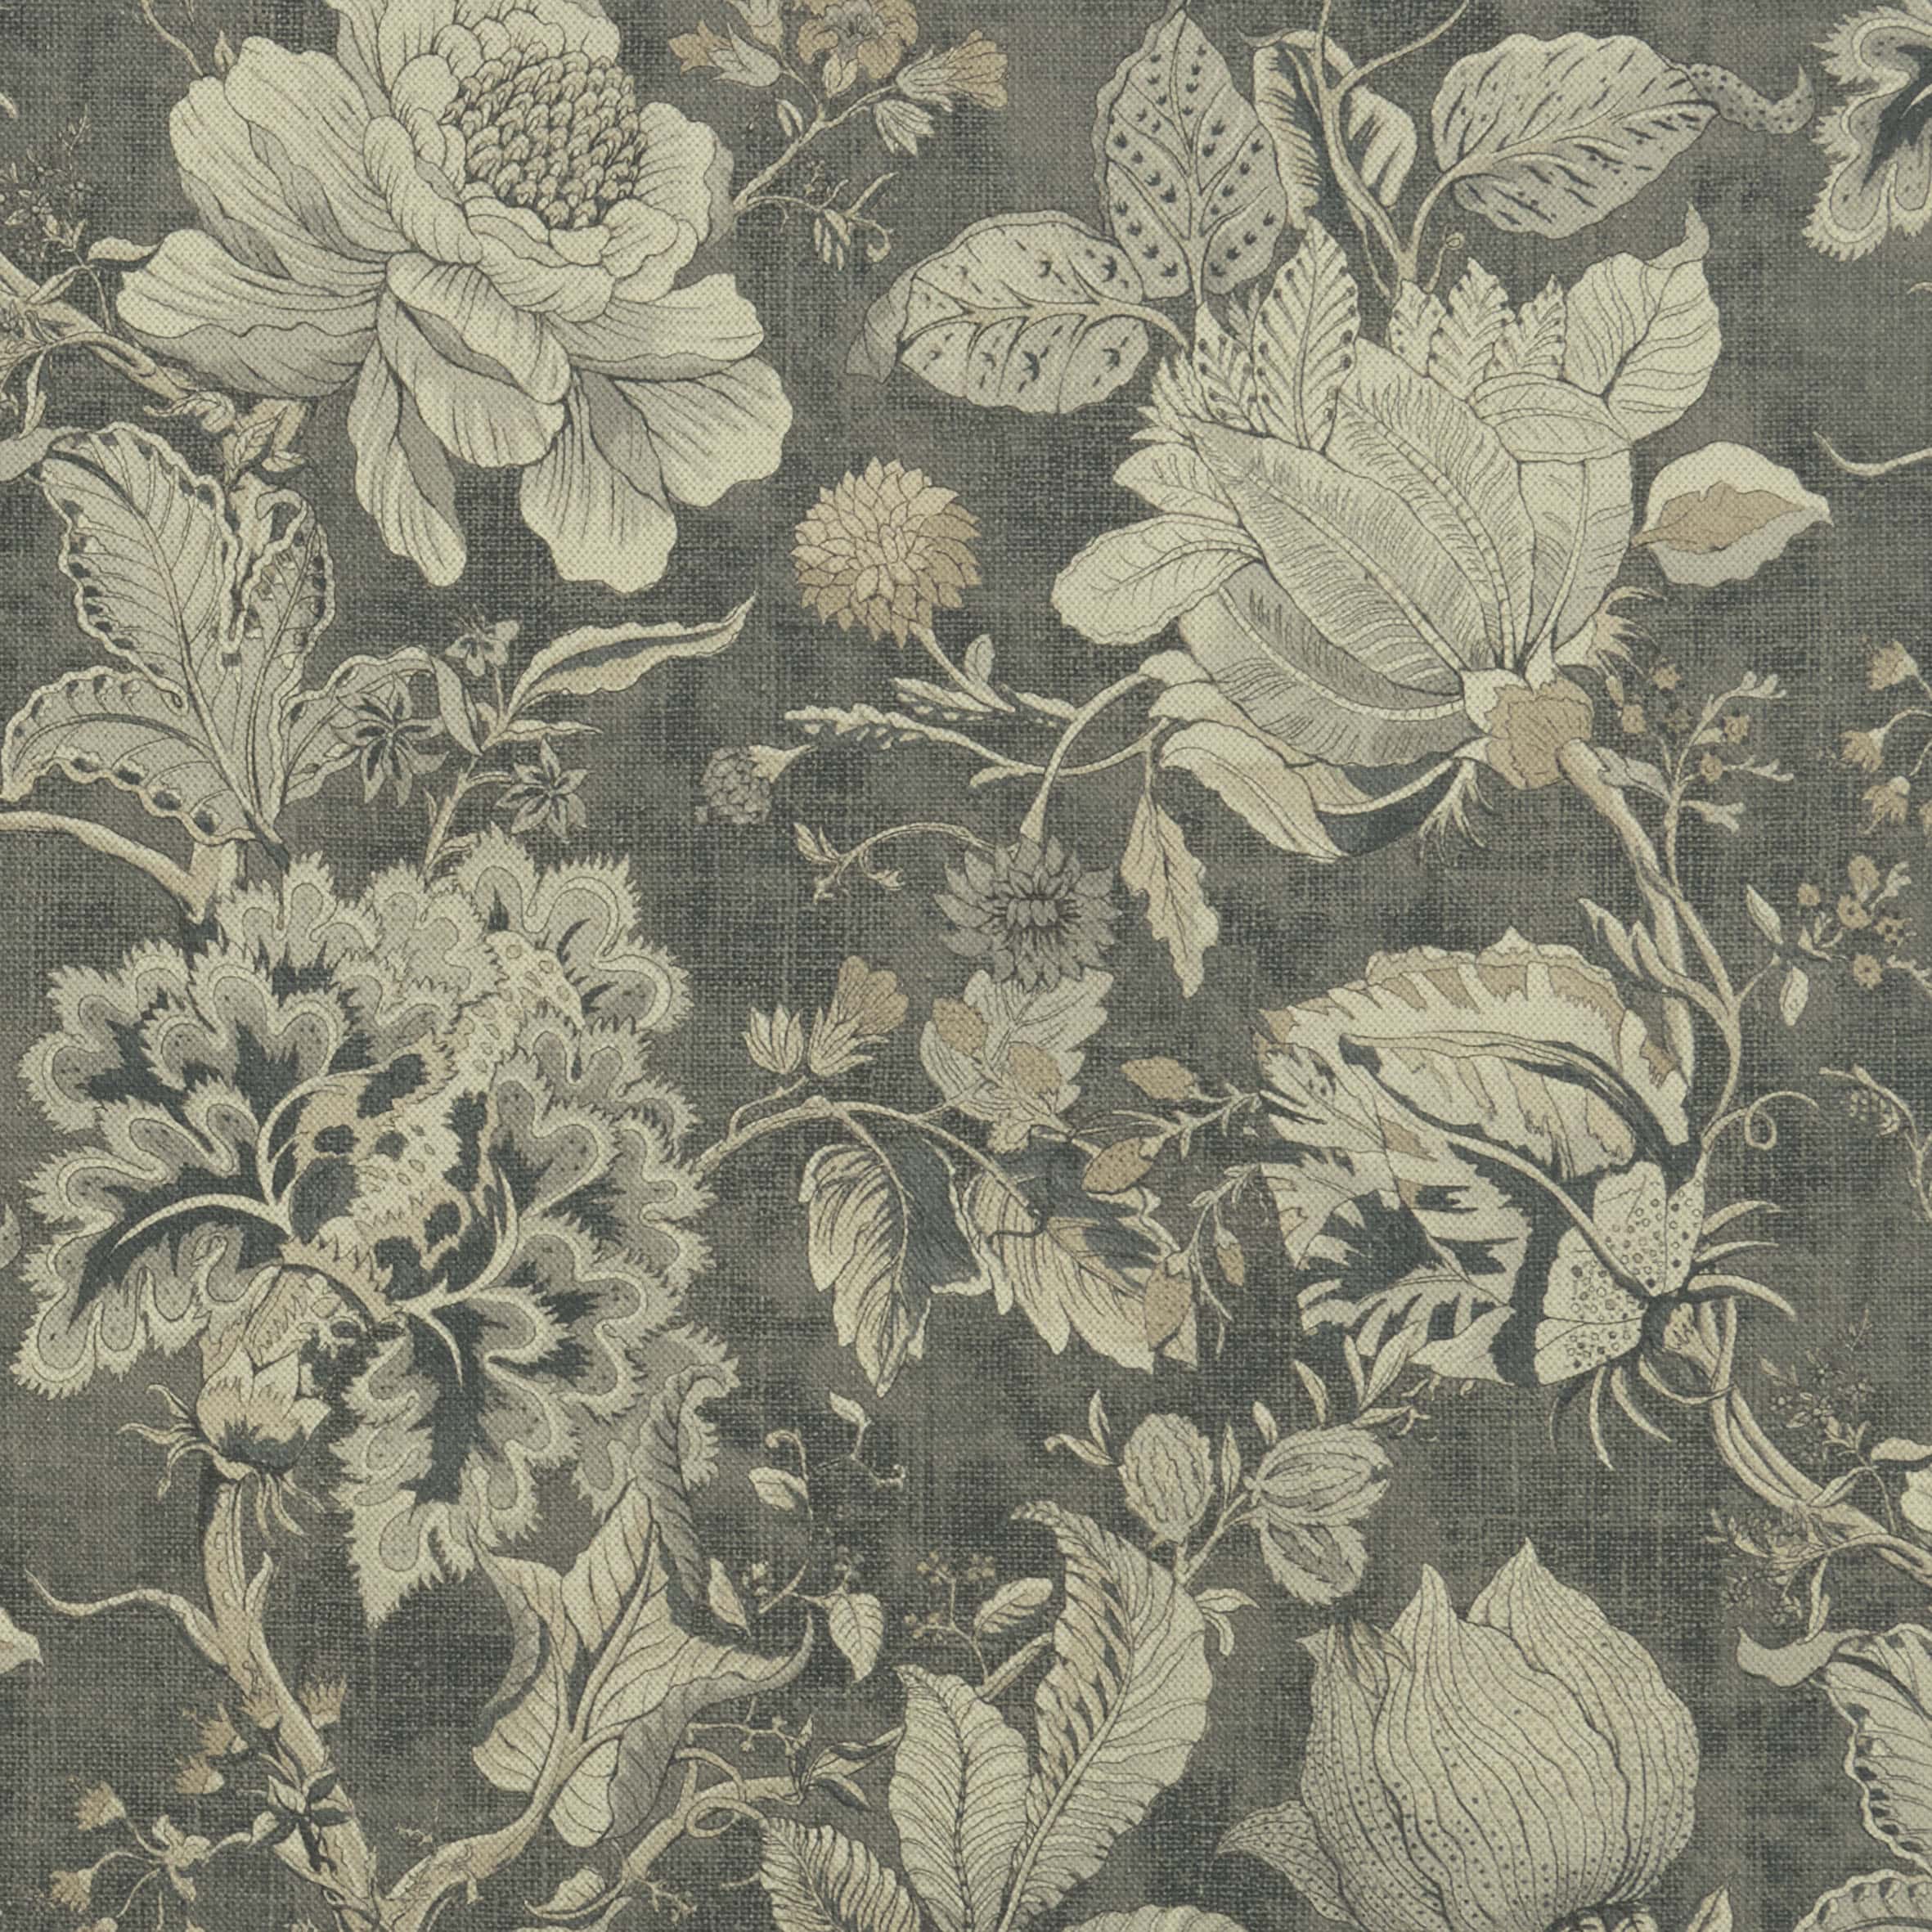 Cream flowers on a dark green background fabric sample - Blinds Norfolk - Norwich Sunblinds